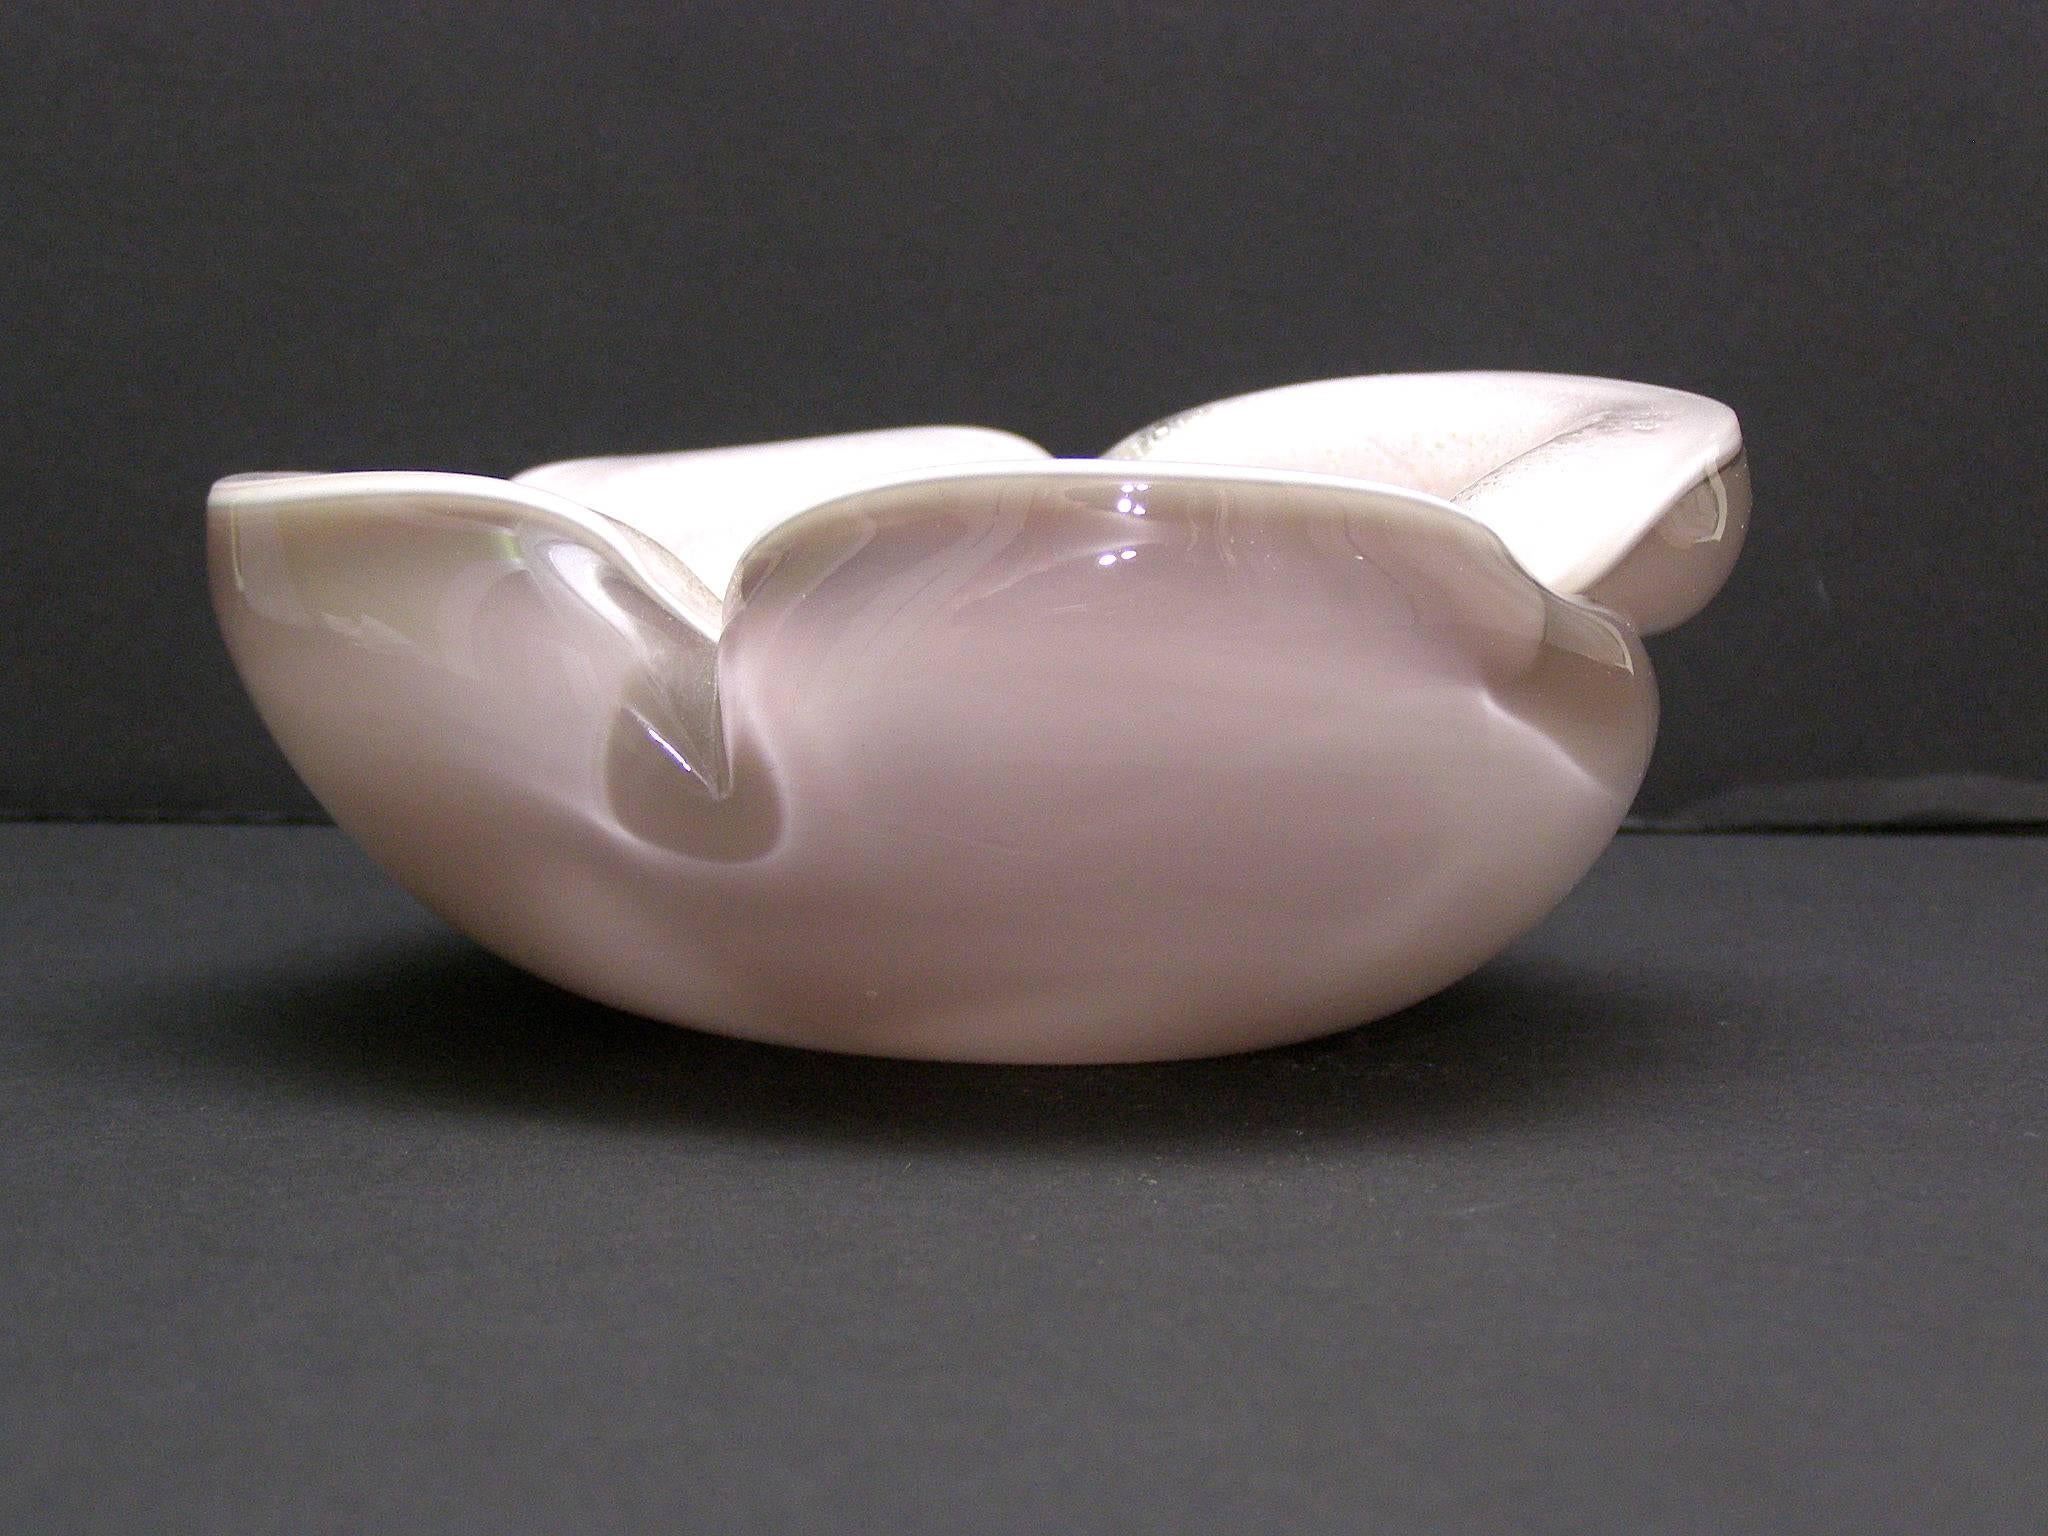 Beautiful handblown Murano glass catch-all bowl in true Venetian pink filled with silver and gold leaf flecking. Gorgeous.